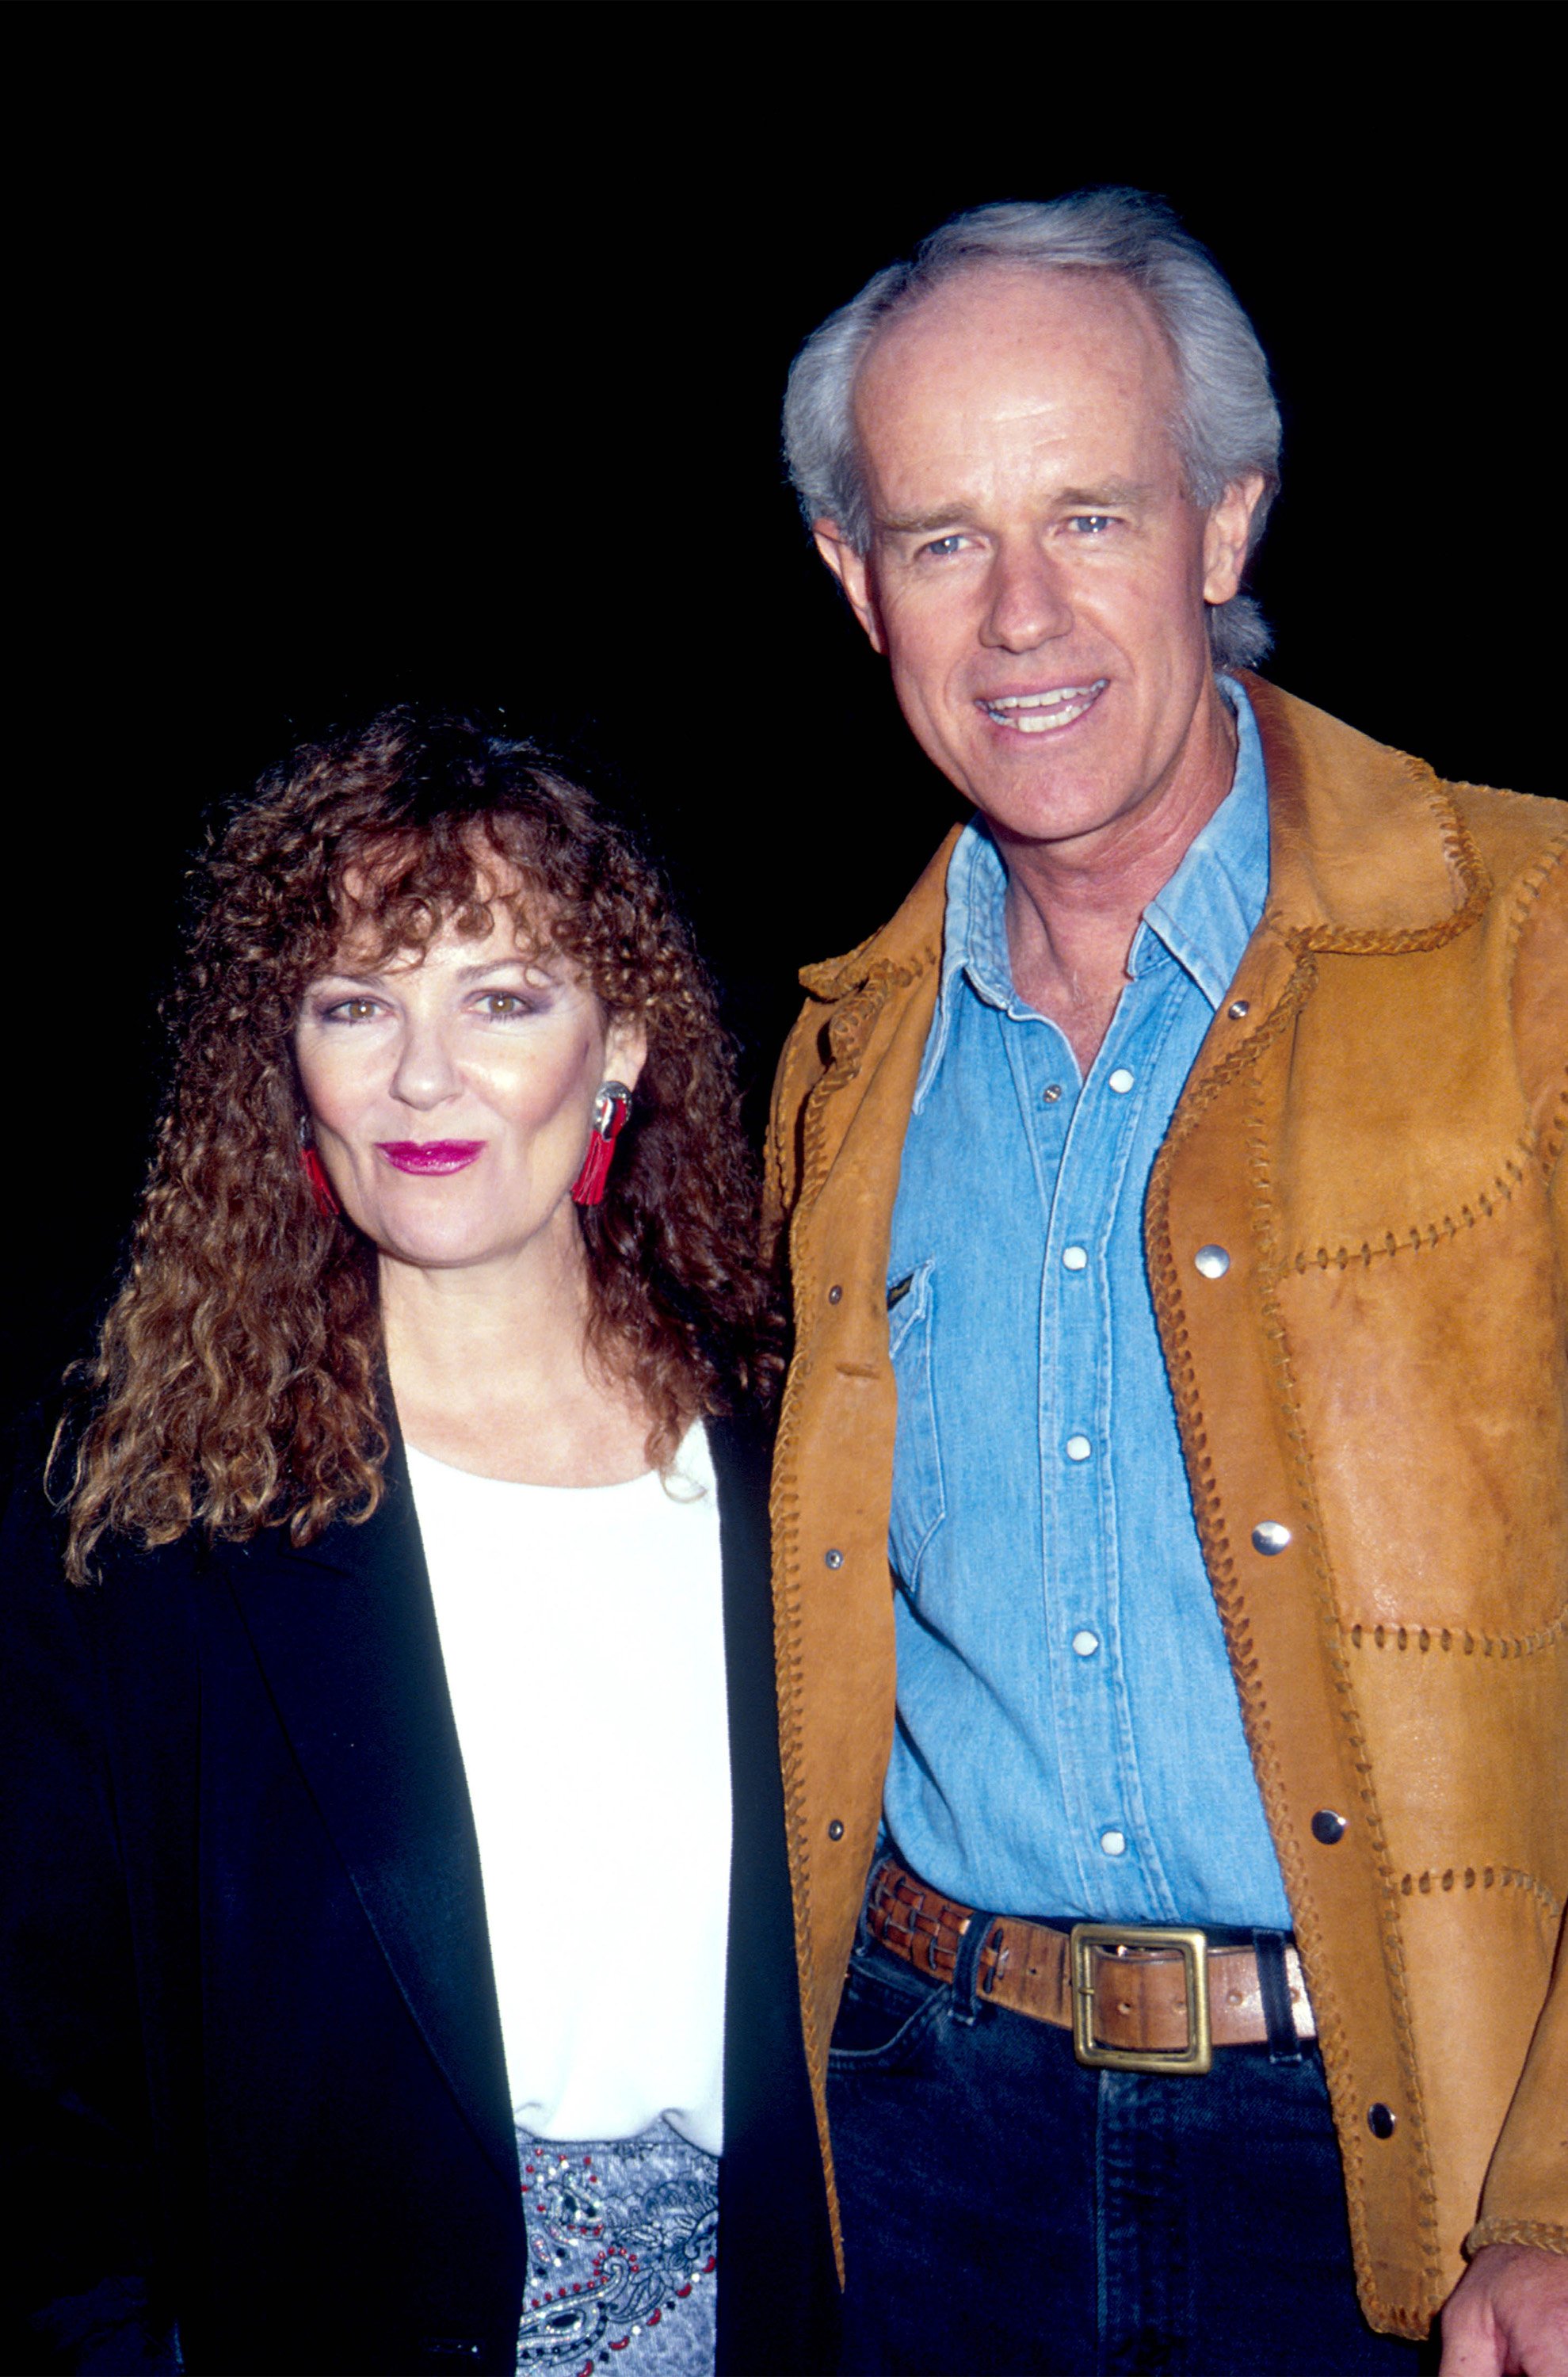 Shelley Fabares and Mike Farrell attend the Scott Newman Foundation event on August 17, 1991 in Los Angeles, California. | Source: Getty Images